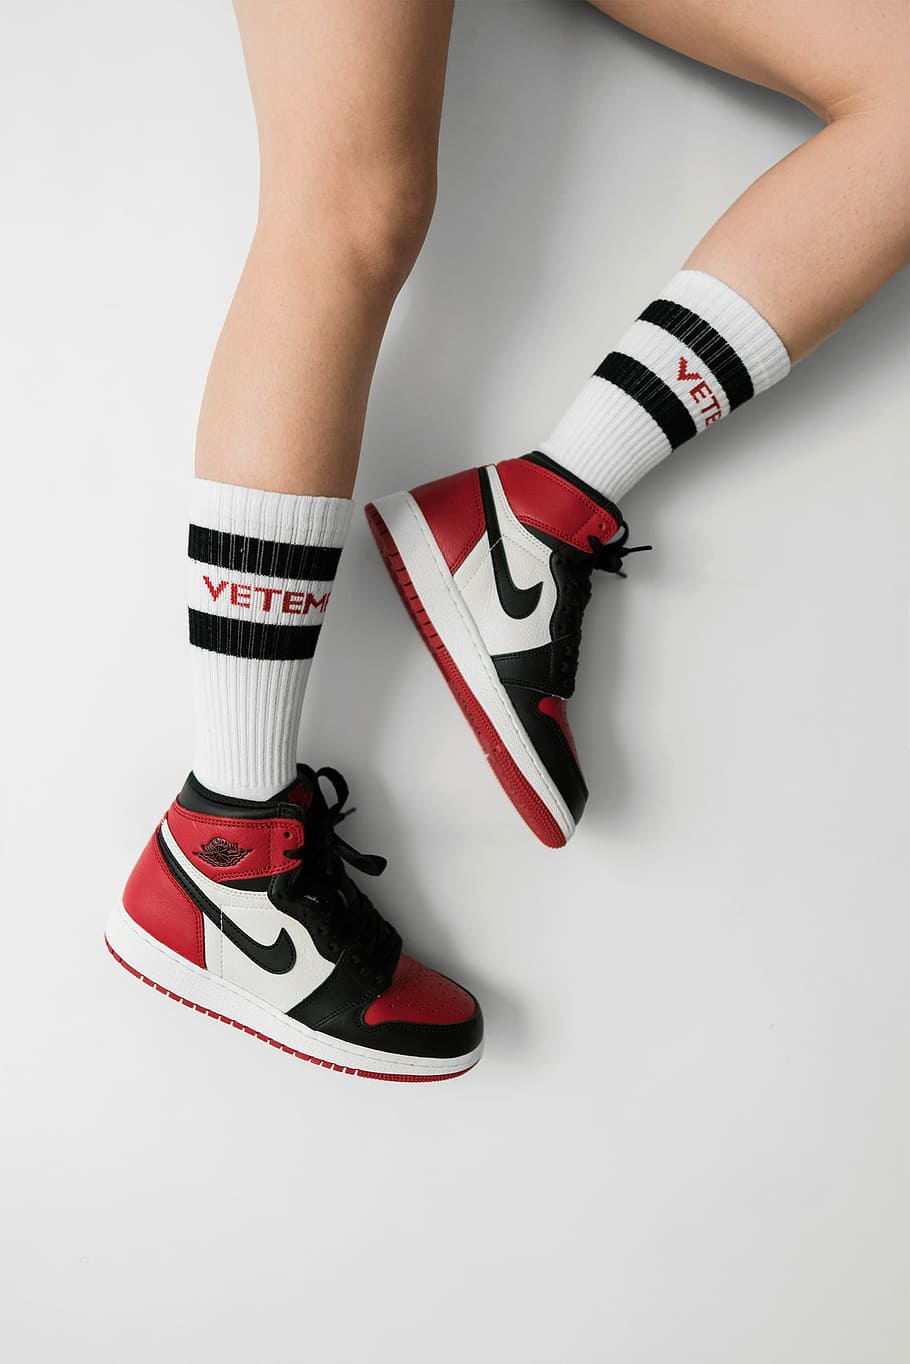 Sneaker Wallpaper - Cool Hypebeast Wallpaper - Latest version for Android -  Download APK